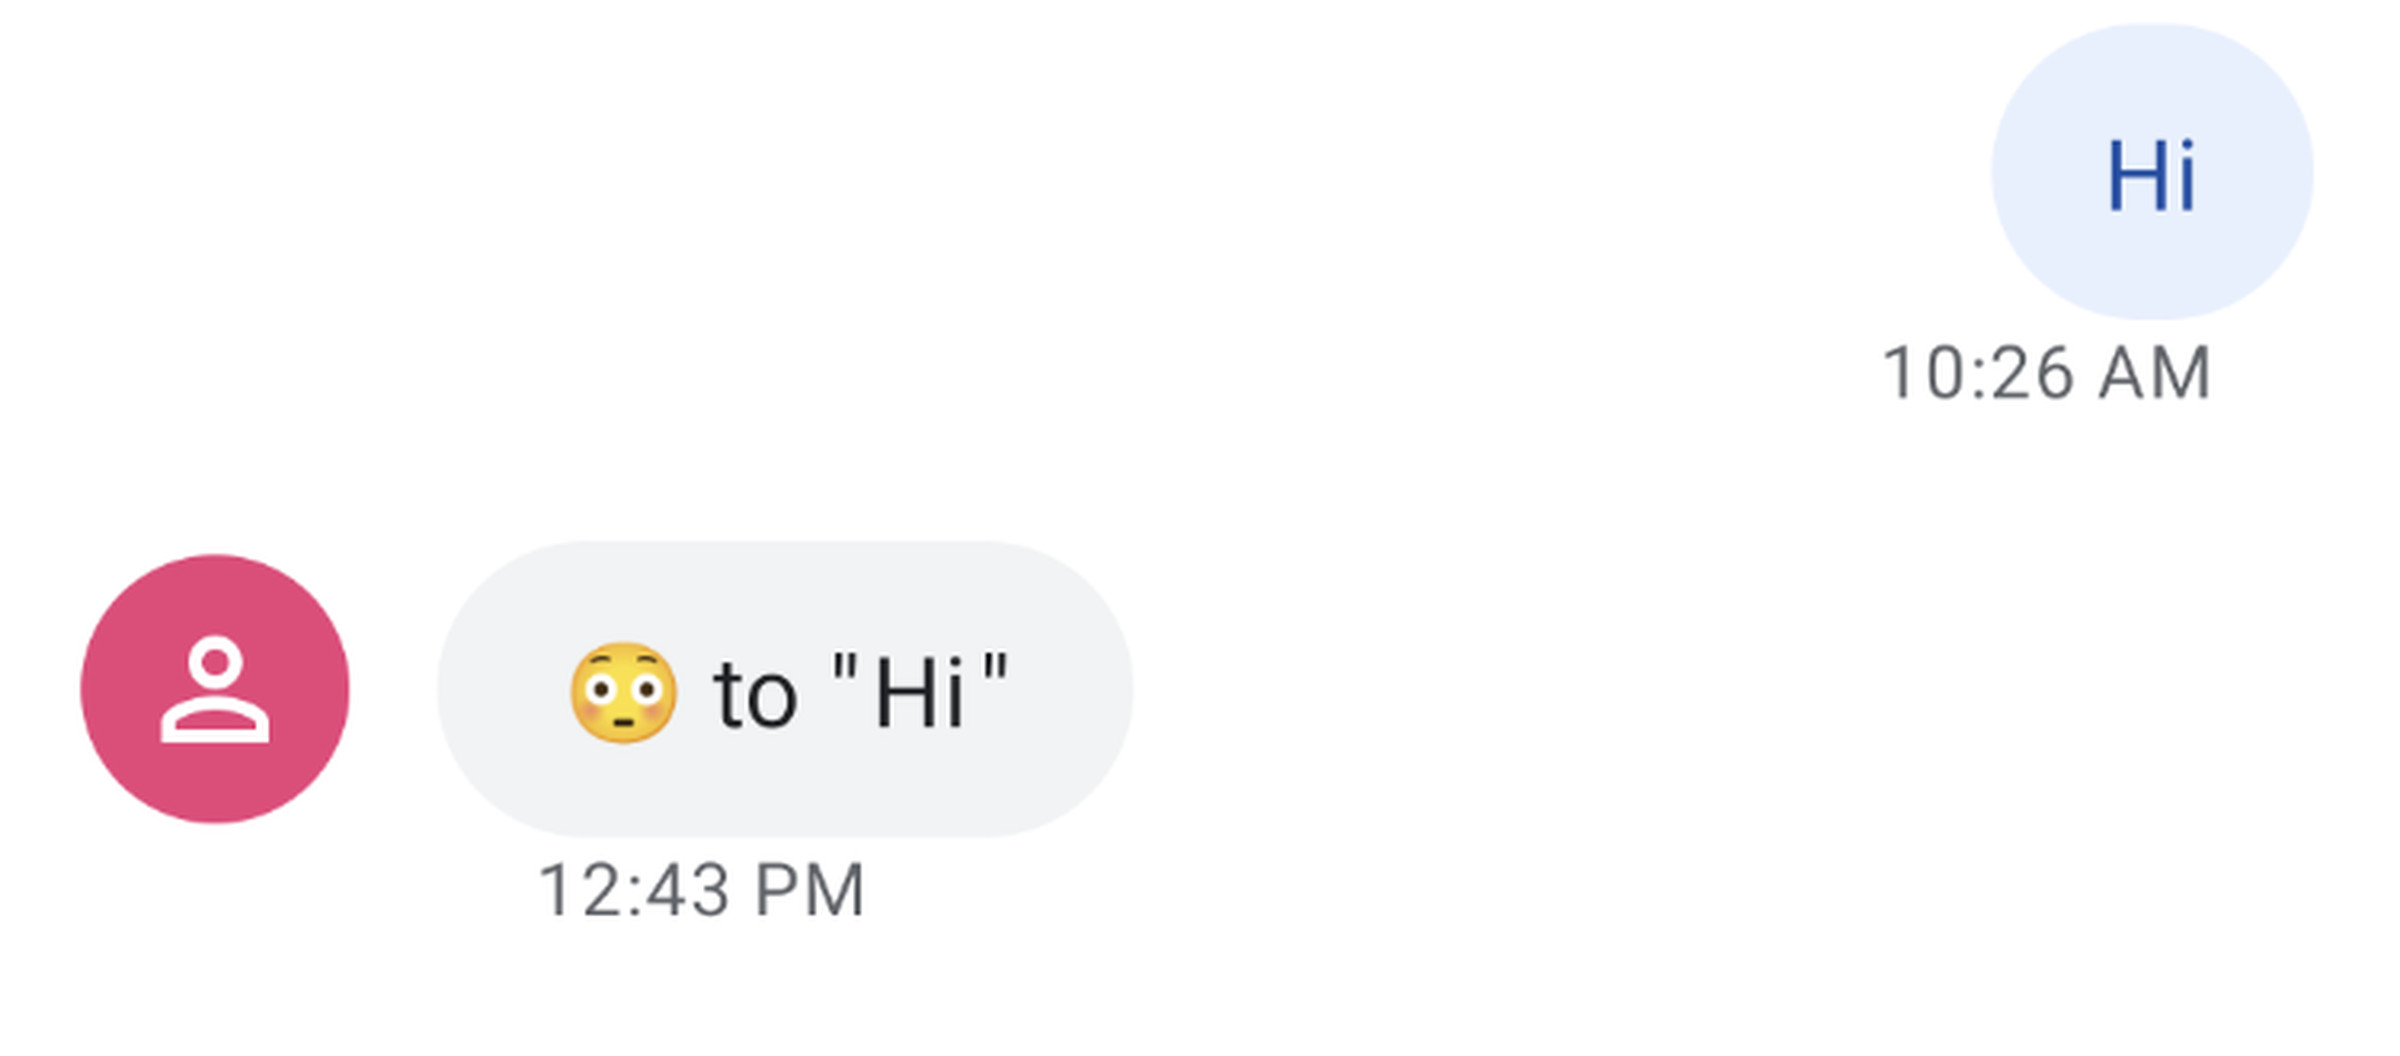 Screenshot of a text message conversation.  One message says “Hi,” and a reply says “face with wide open eyes emoji to 'Hi.'”